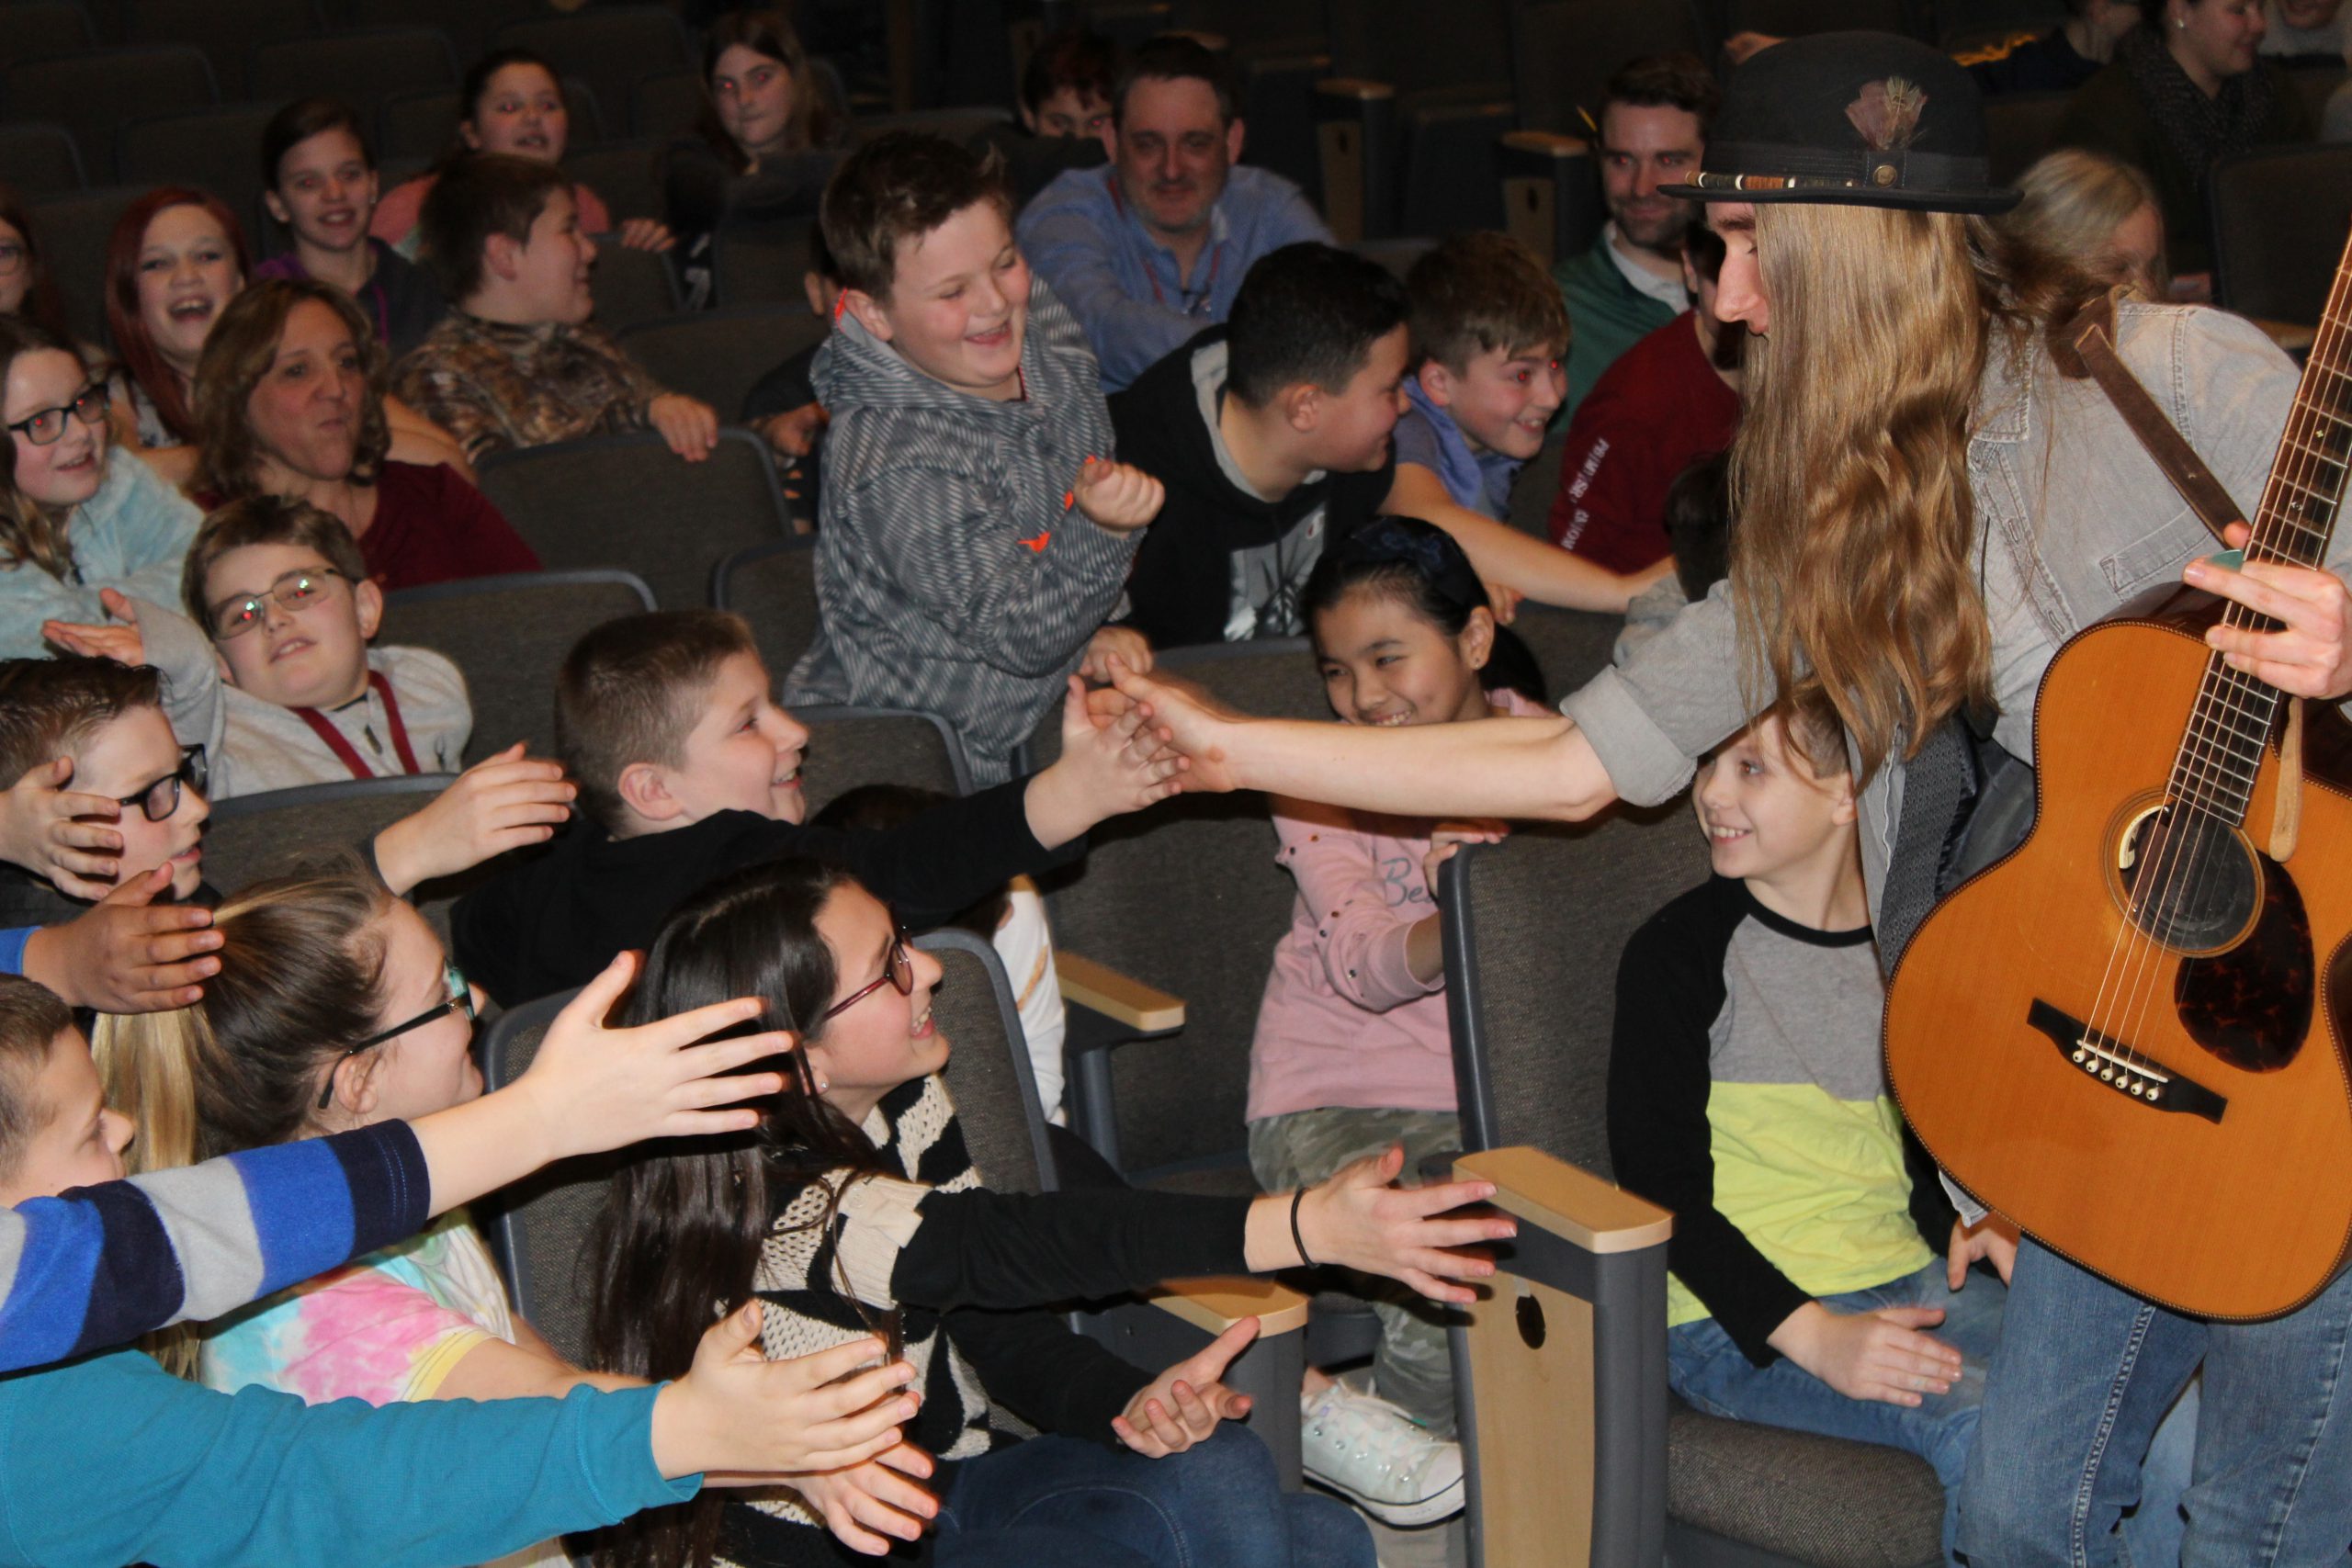 musician holding a guitar gives middle school students high fives in a school auditorium